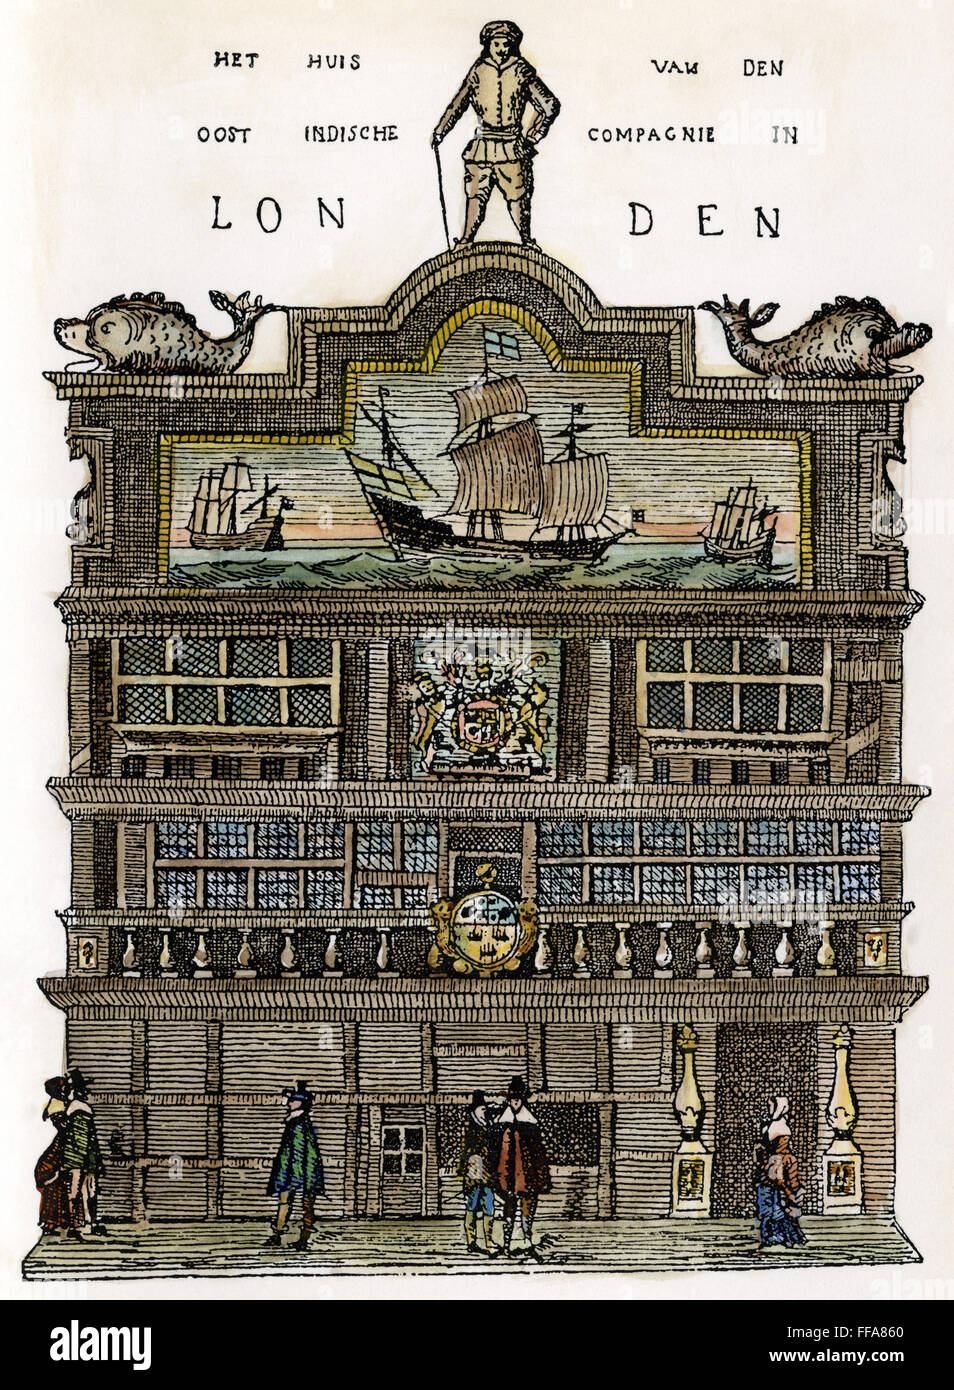 EAST INDIA COMPANY, 17th C. /nThe headquarters of the British East India Company in London. Dutch colored engraving, 17th century. Stock Photo